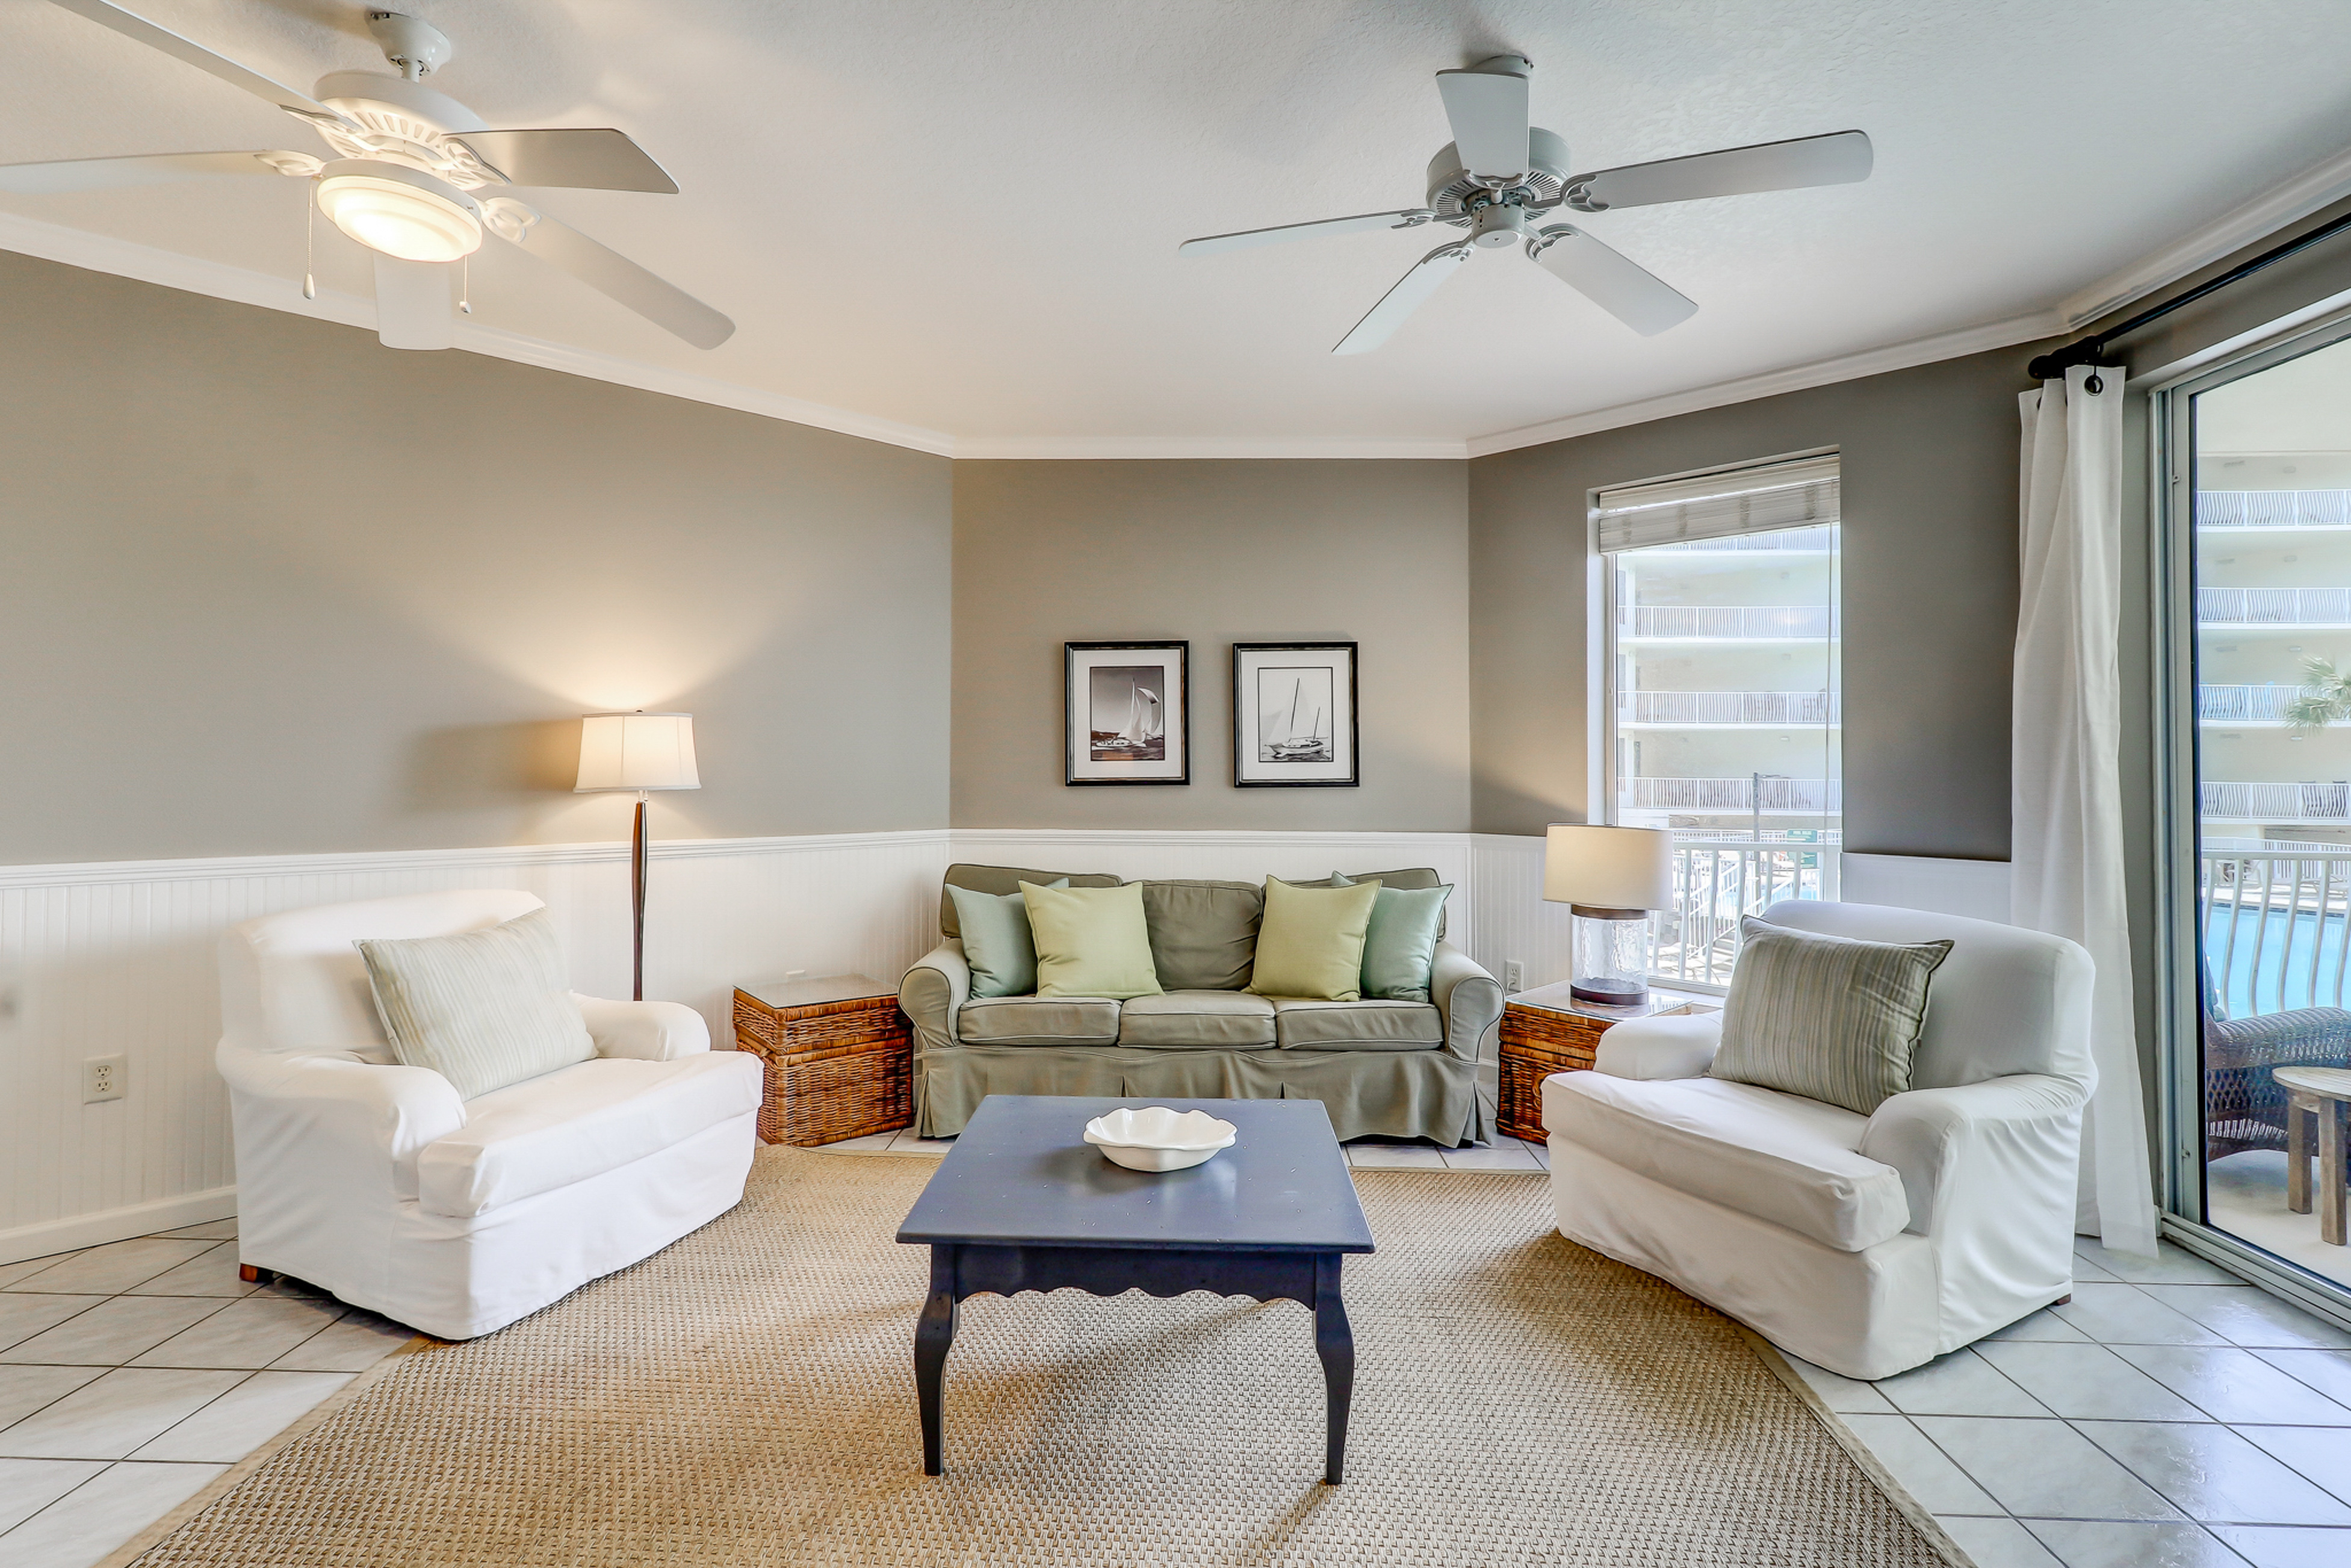 Dunes of Seagrove B102 Condo rental in Dunes of Seagrove in Highway 30-A Florida - #1